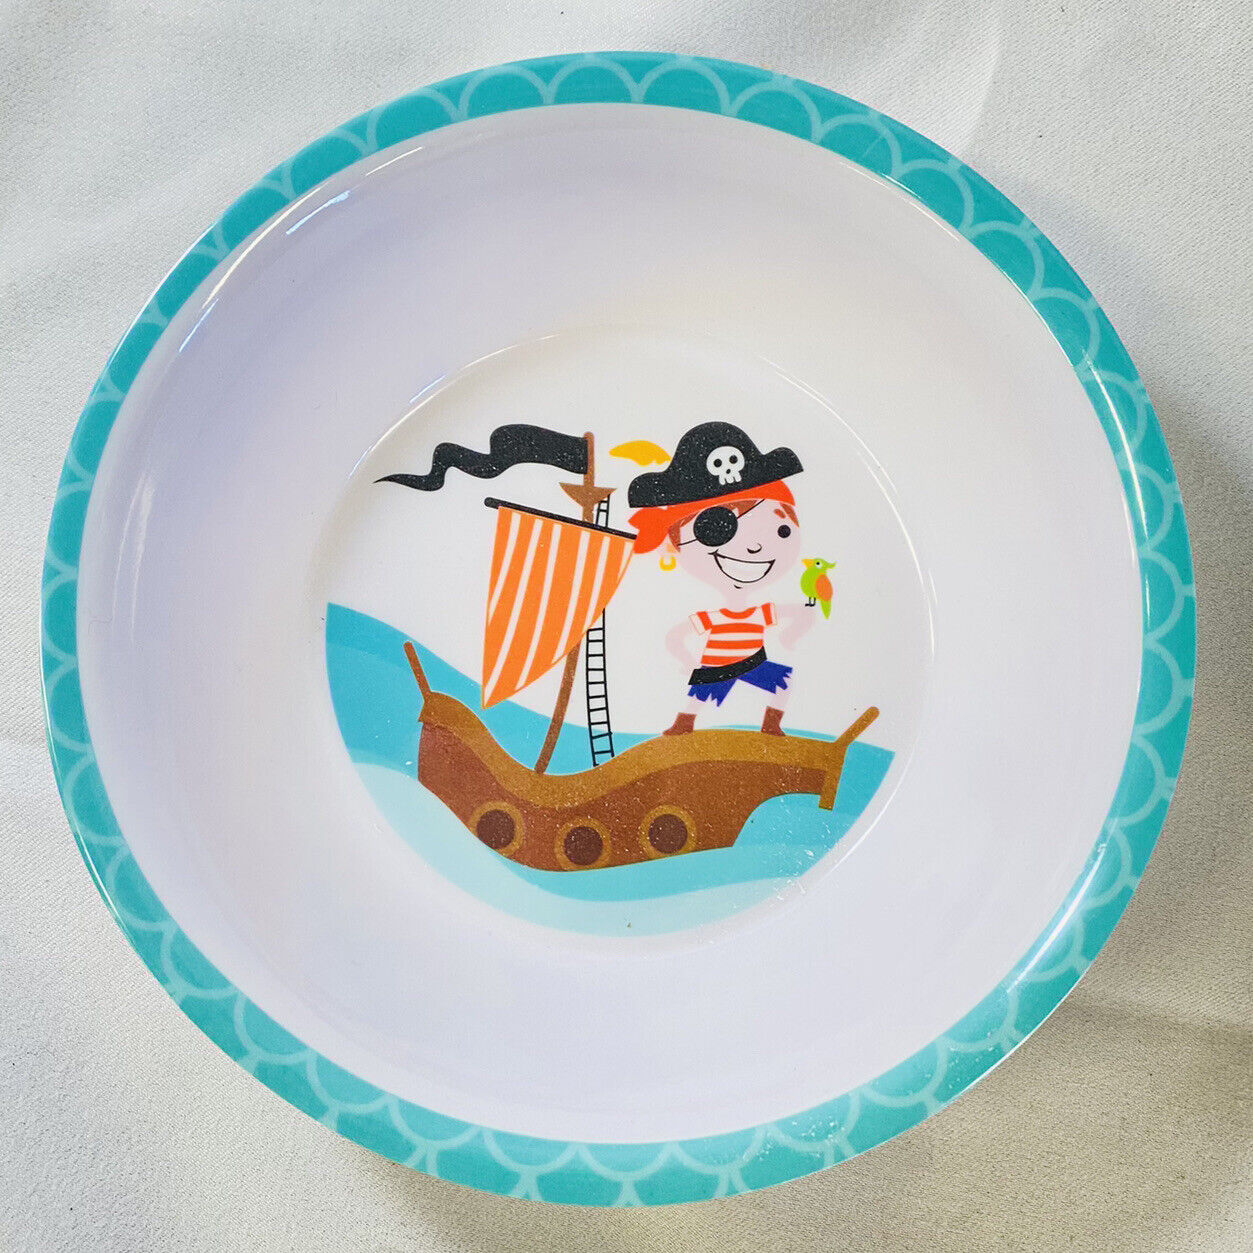 Child's Boy's Dinnerware Divided Plate Bowl & Cup Set Melamine BPA Free Pirates Regent Products n/a - фотография #6